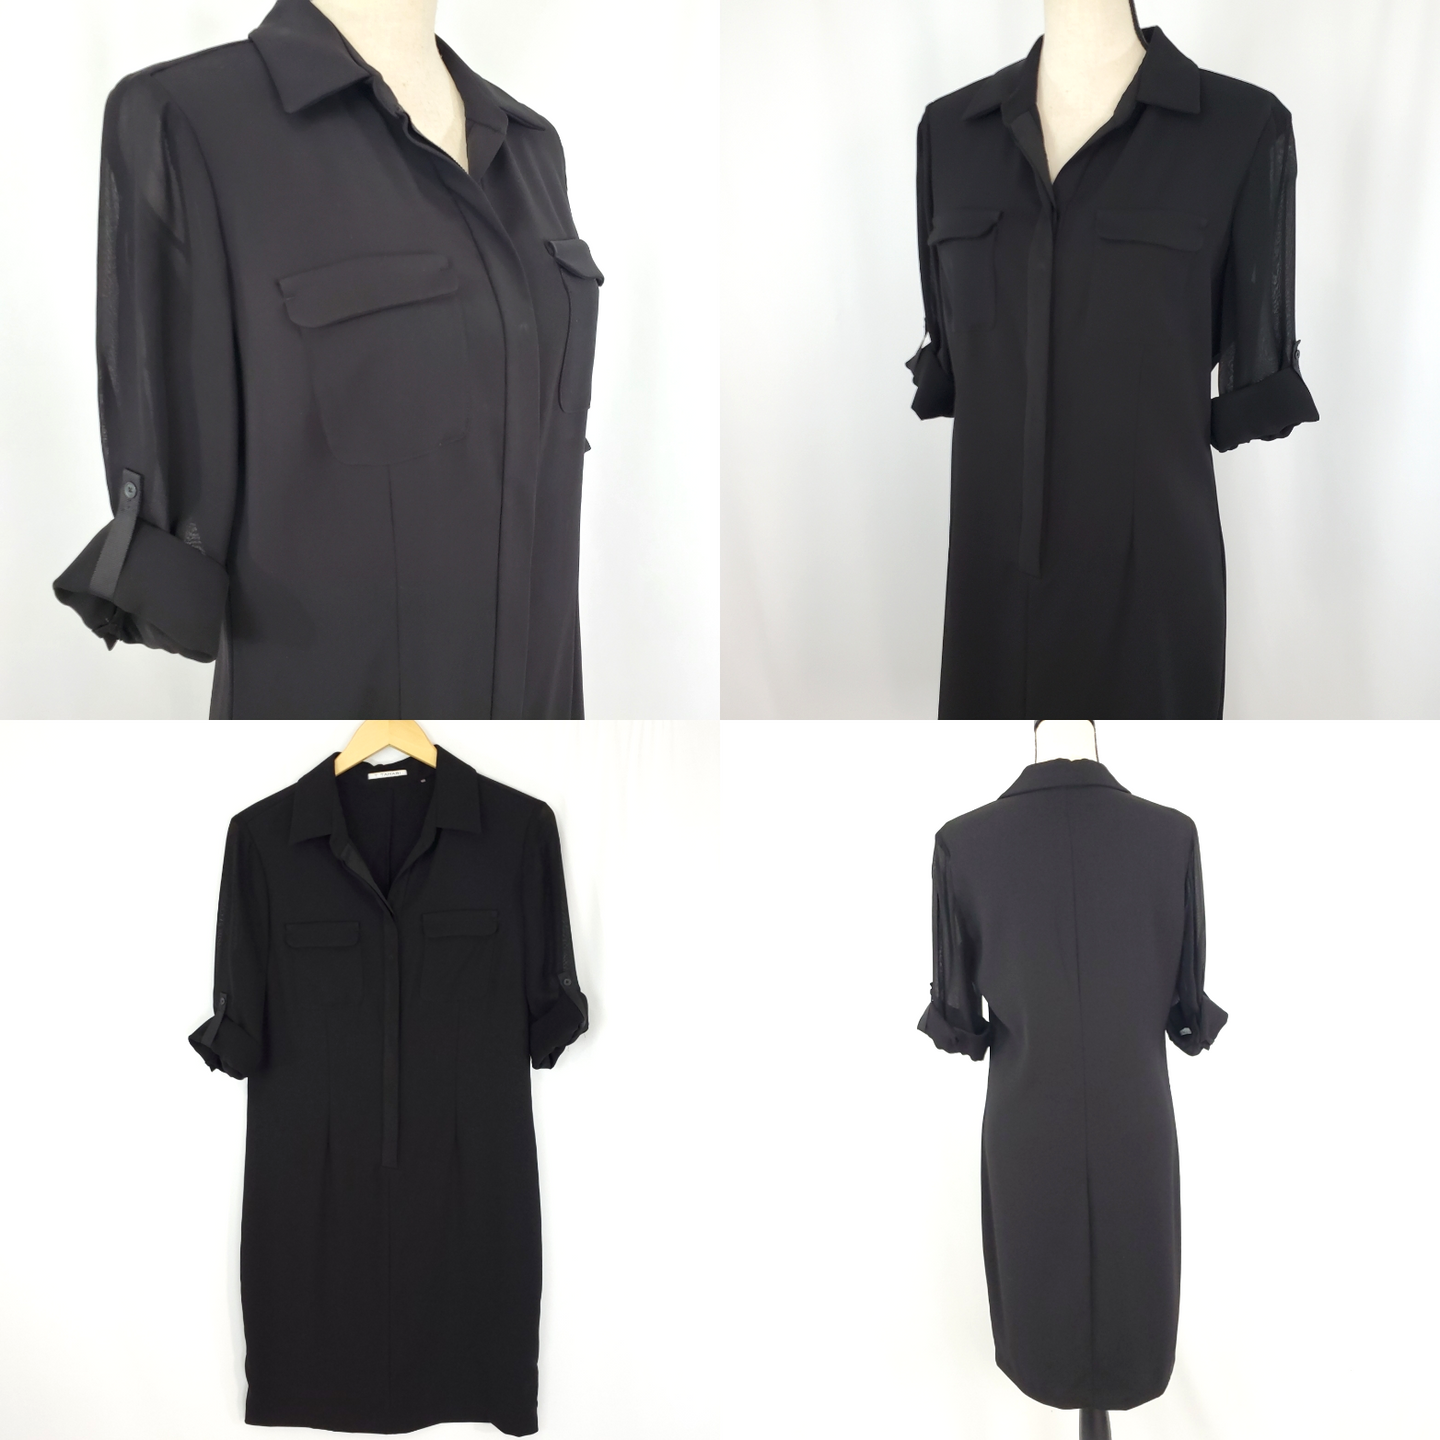 Tahari Black Shirt Dress 3/4 Button Front with Roll Tab Sleeves 